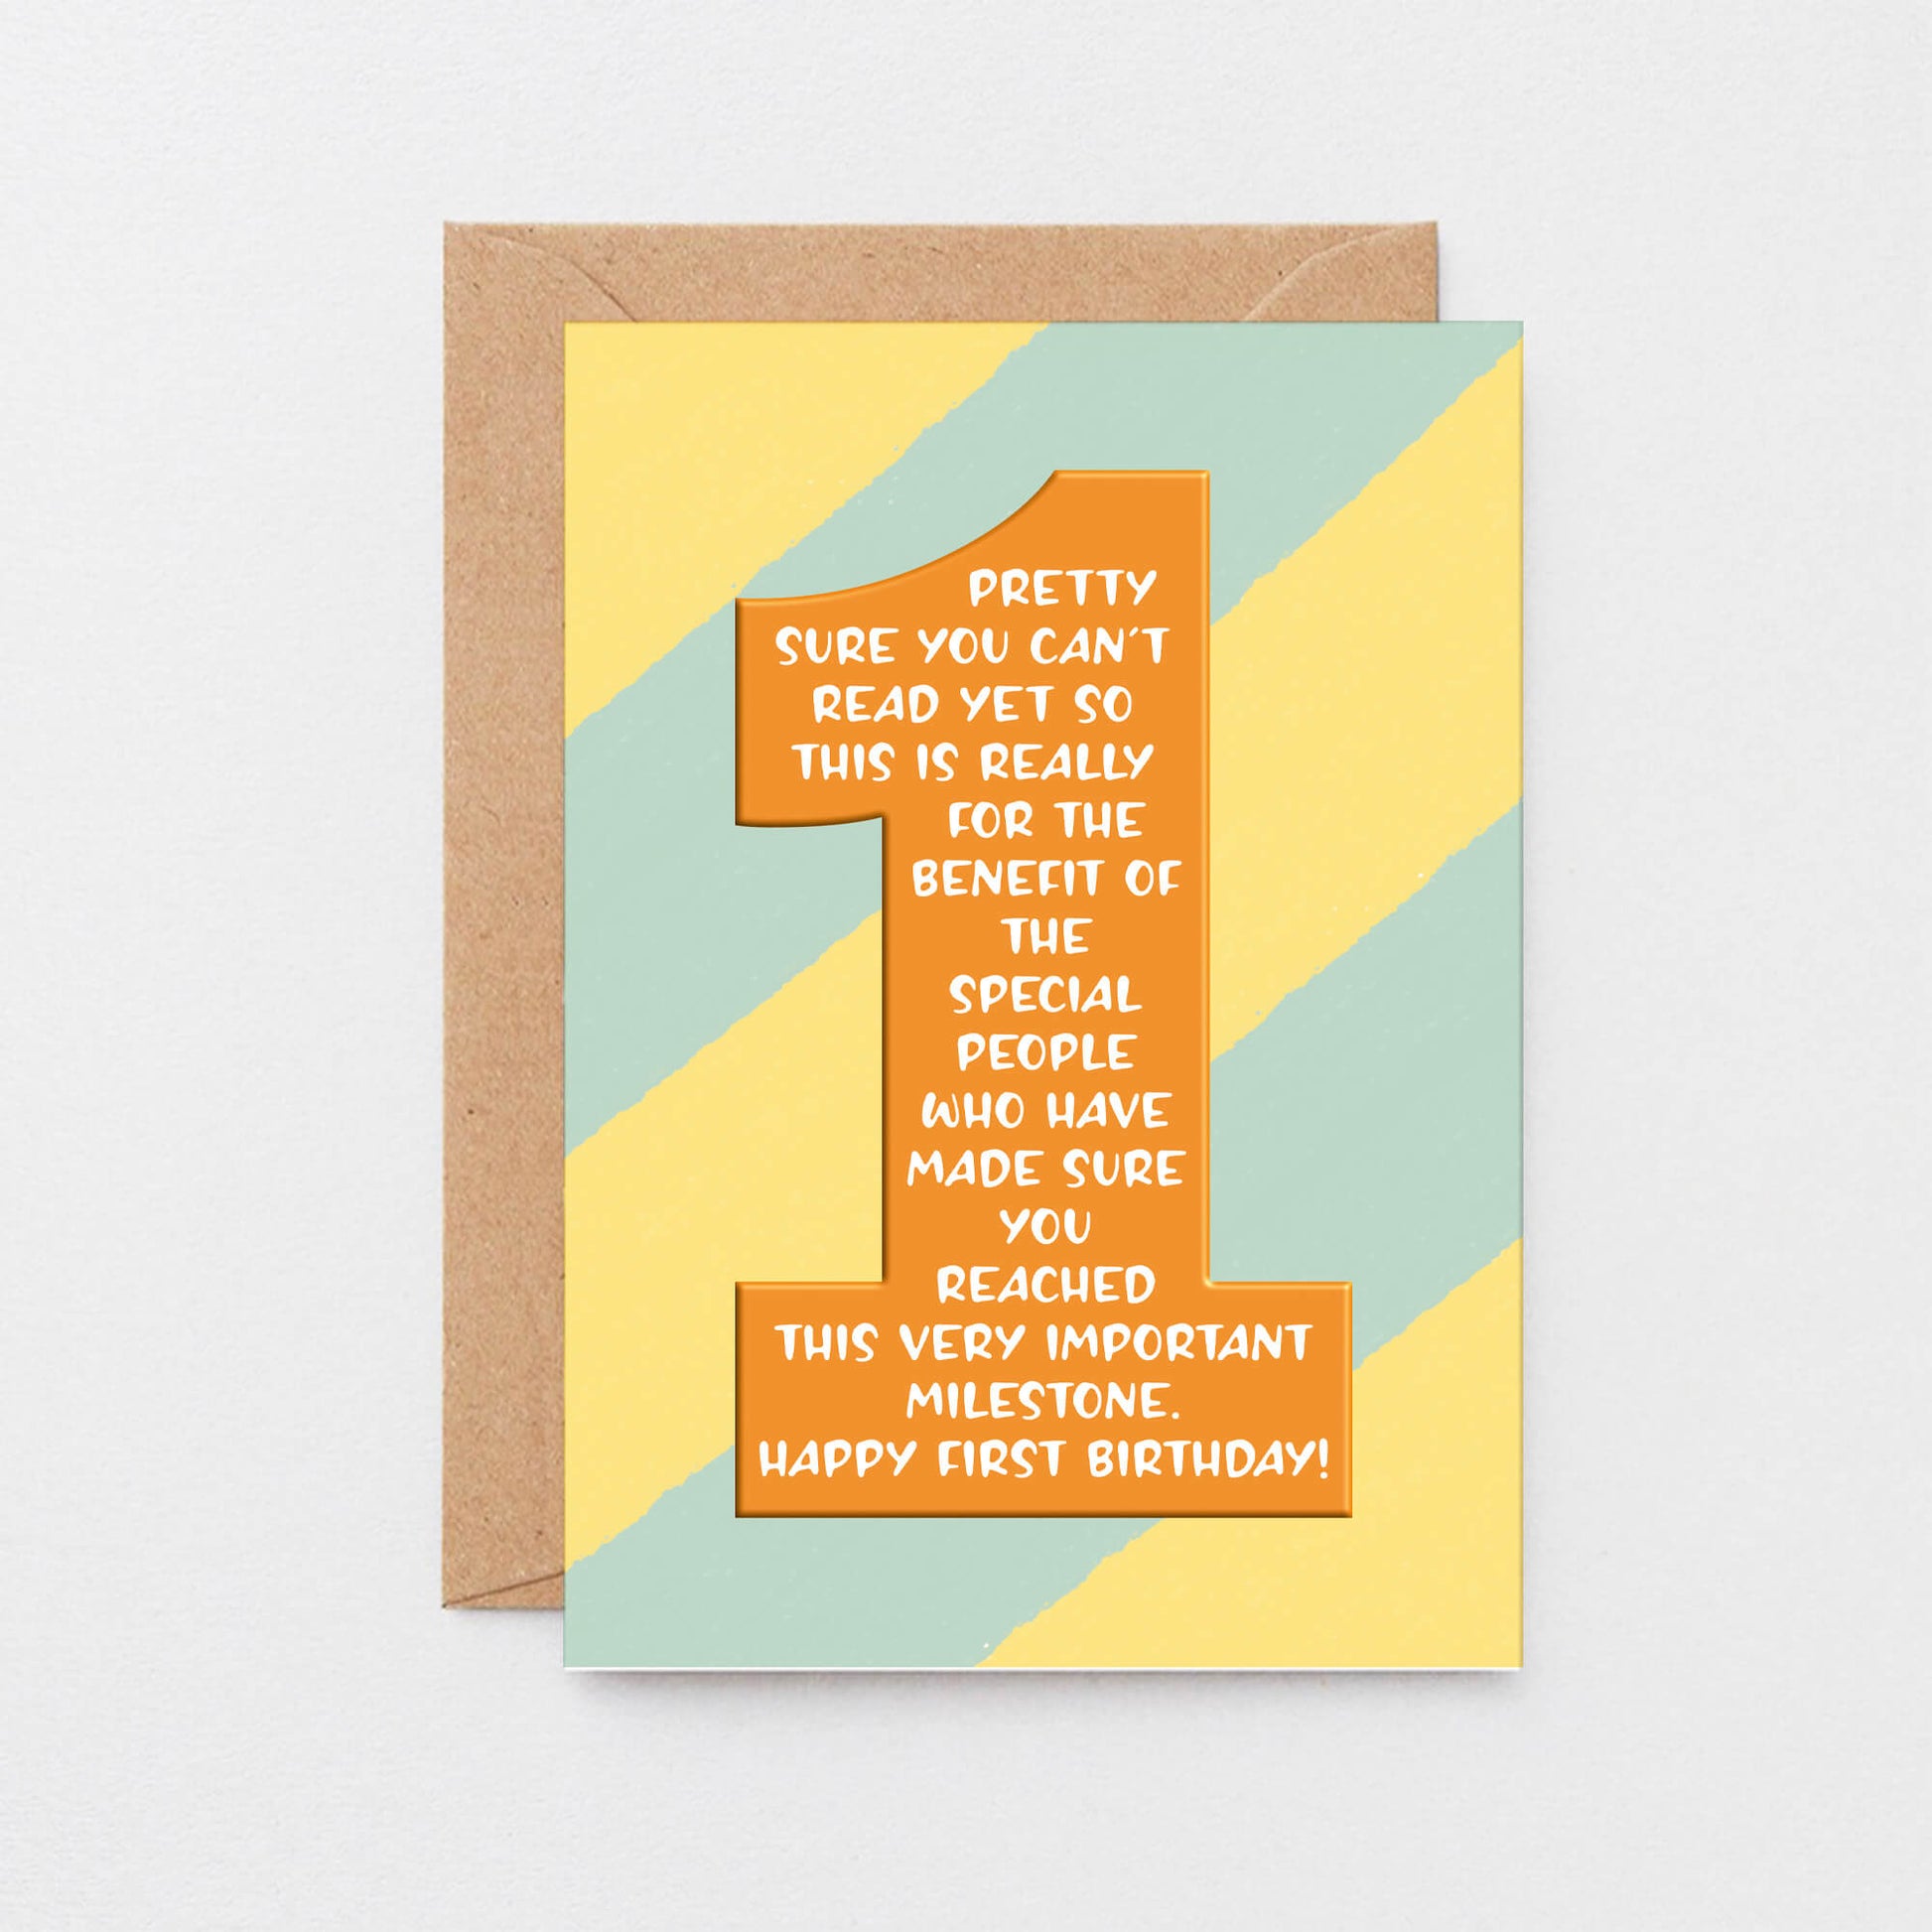 1st Birthday Card by SixElevenCreations. Reads Pretty sure you can't read yet so this is really for the benefit of the special people who have made sure you reached this very important milestone. Happy first birthday! Product Code SE6001A6